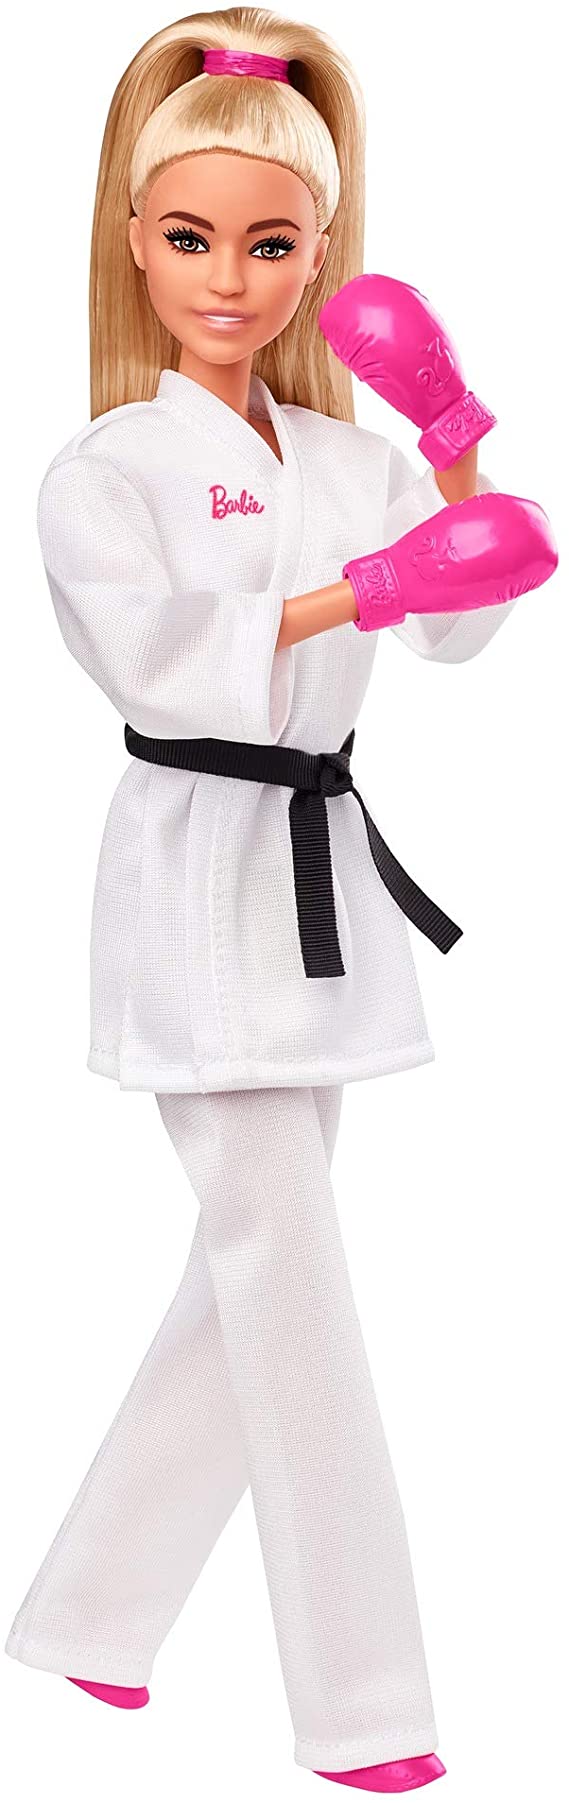 Barbie Olympic Games Tokyo 2020 Karate Doll with Karate Uniform, Tokyo 2020 Jacket, Medal, Helmet, Sparring Gloves and Sandals for Ages 3 and Up, Multi (GJL74)